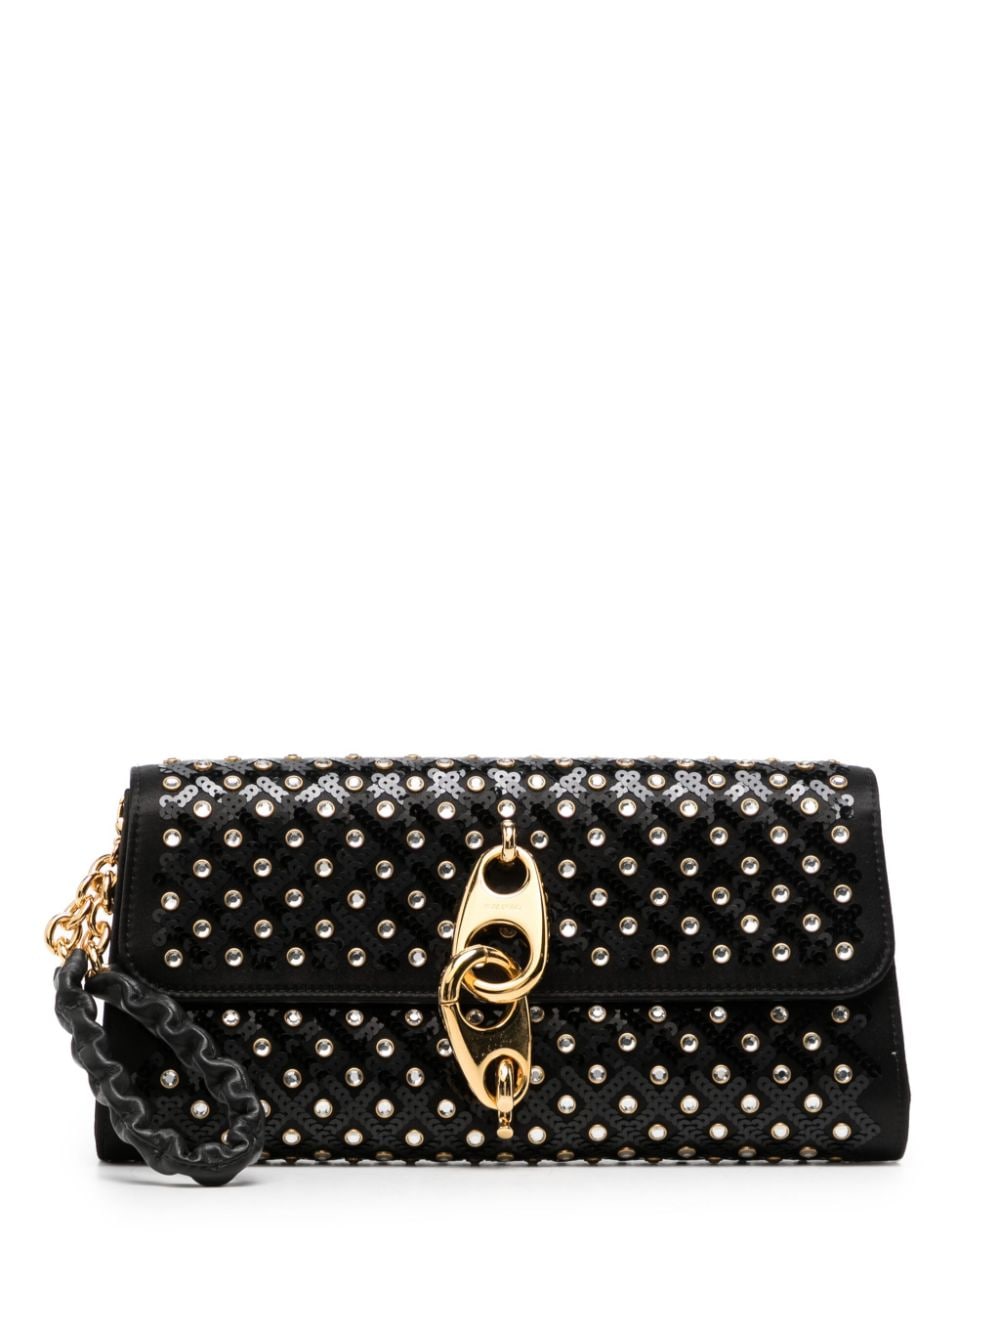 Studded Embroidered Clutch Purse